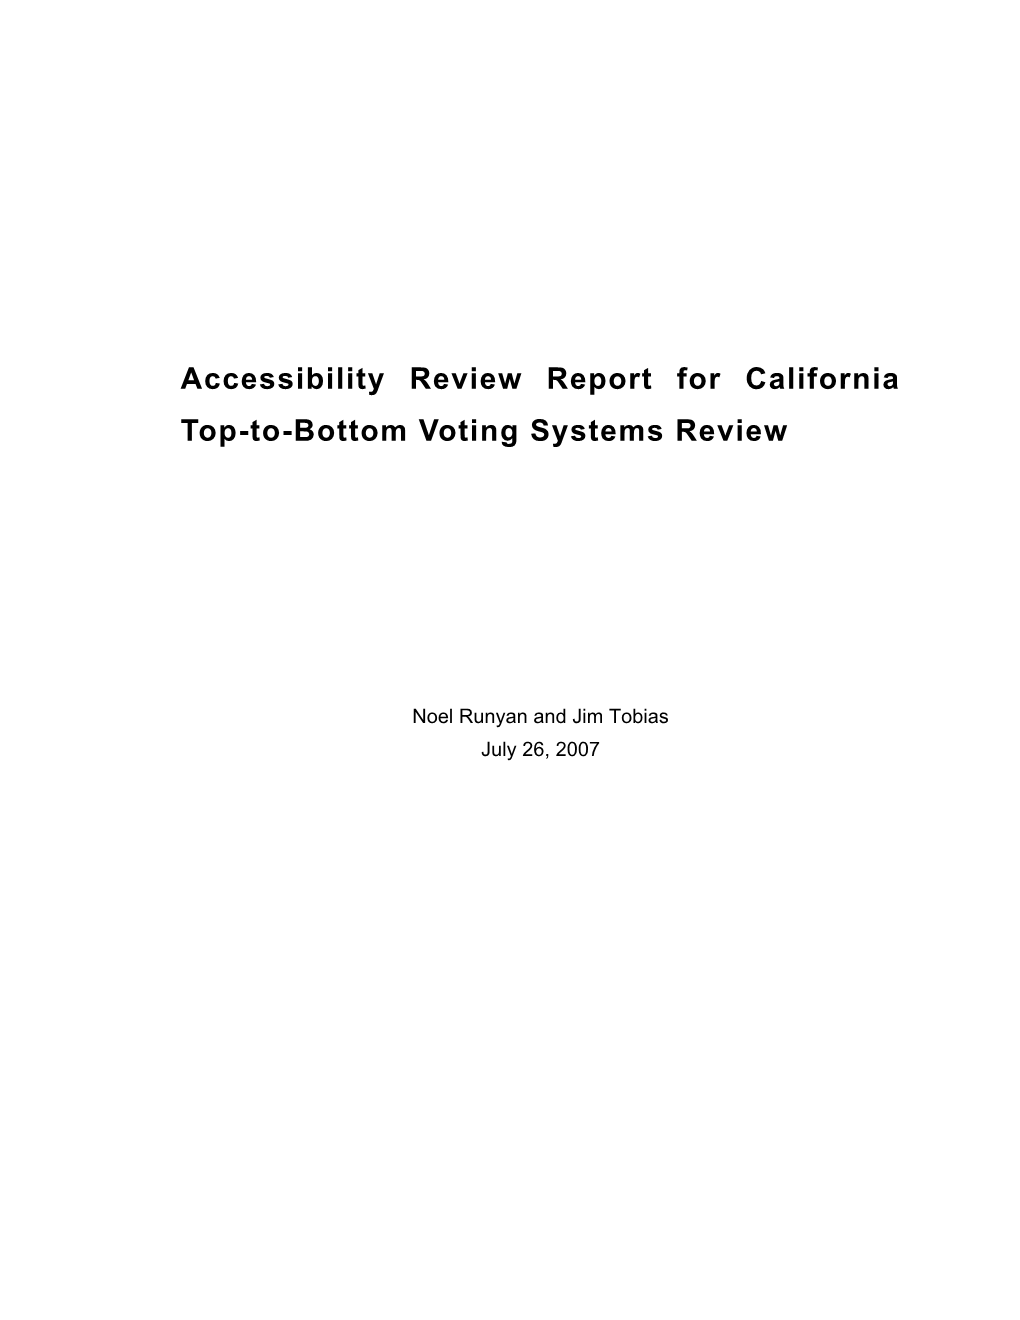 Accessibility Review Report for California Top-To-Bottom Voting Systems Review